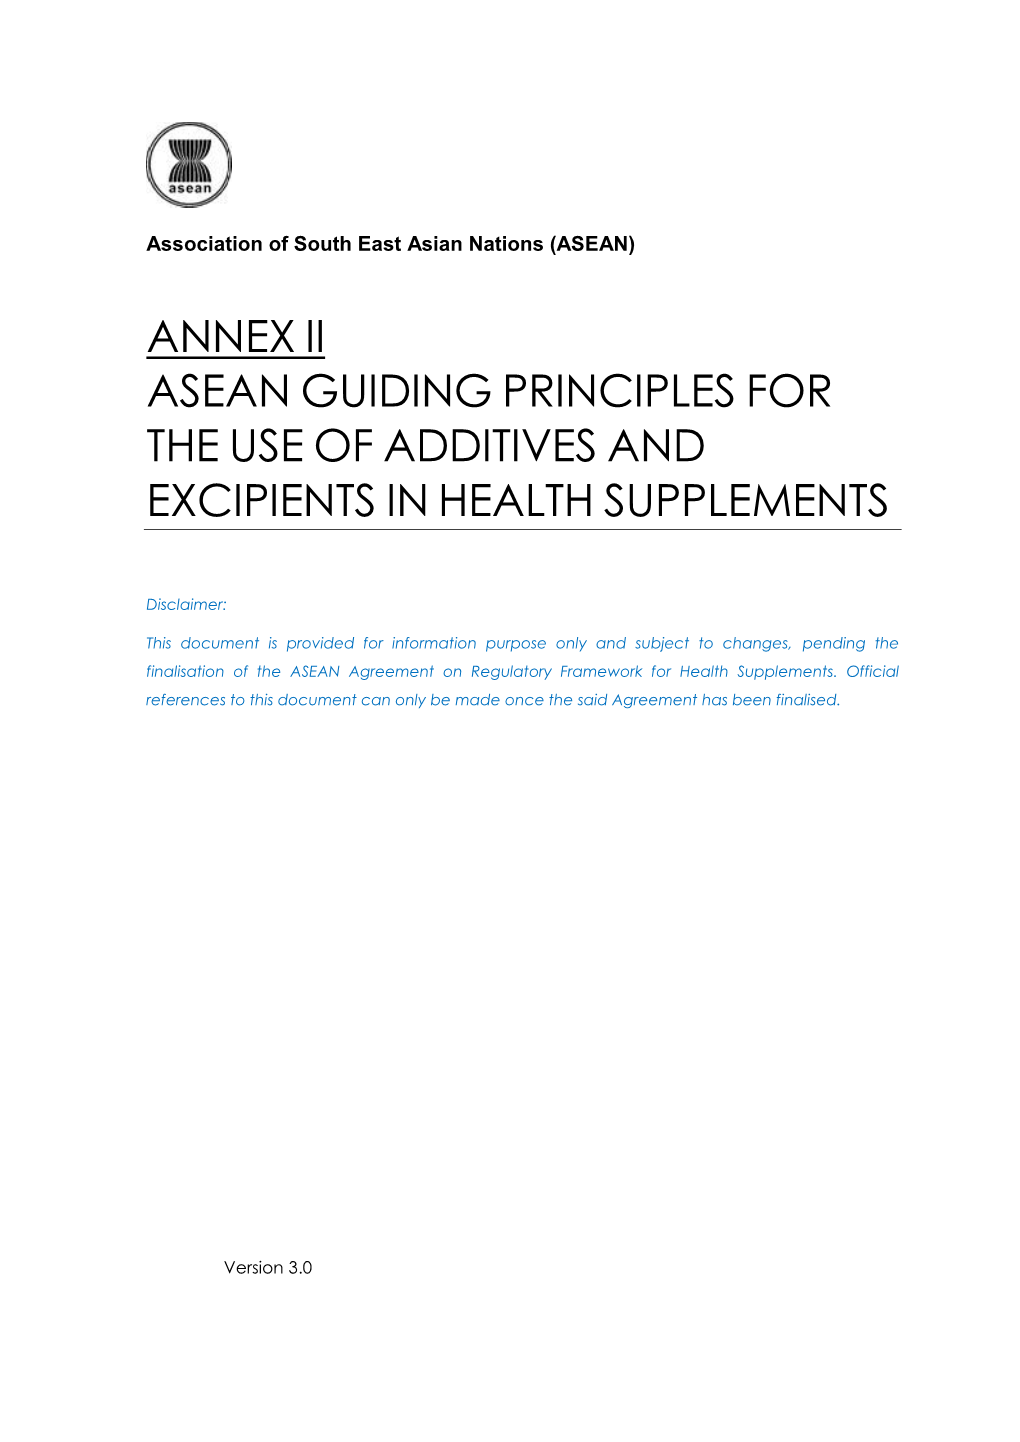 Annex Ii Asean Guiding Principles for the Use of Additives and Excipients in Health Supplements